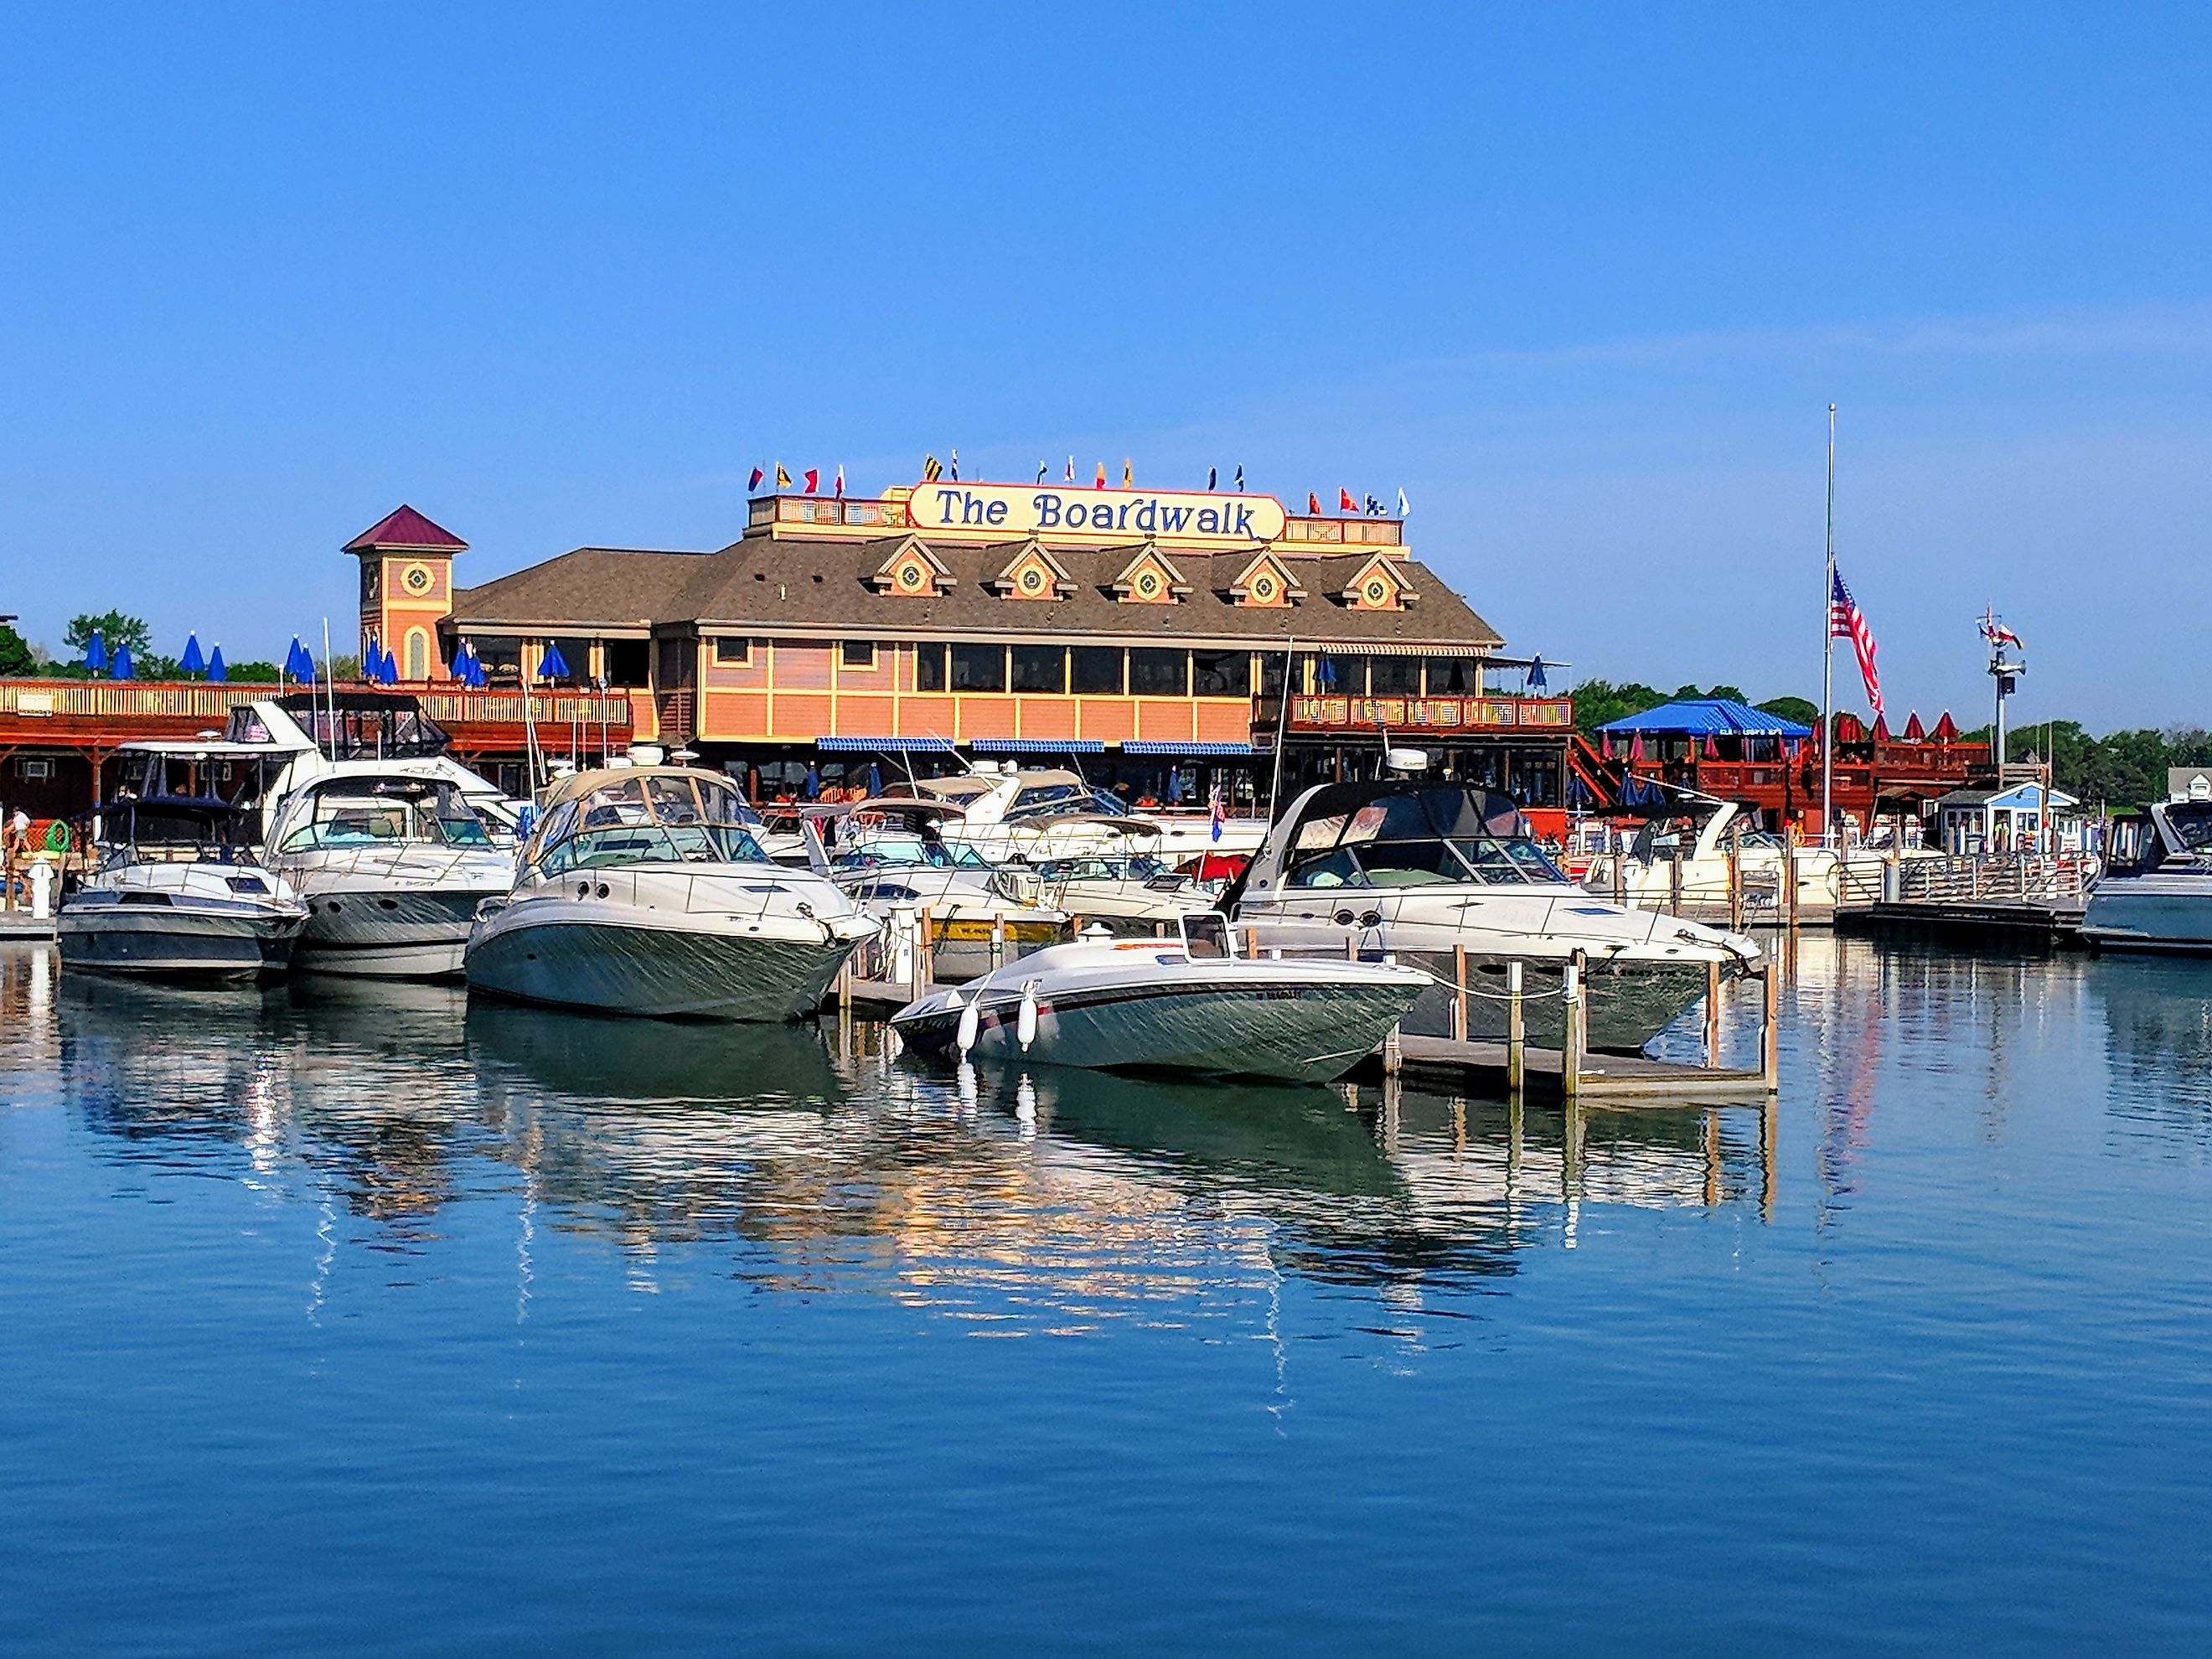 Put-in-bay, Ohio - May 27, 2018: Boats tied up at A-Dock with the famous Boardwalk restaurant in the background.